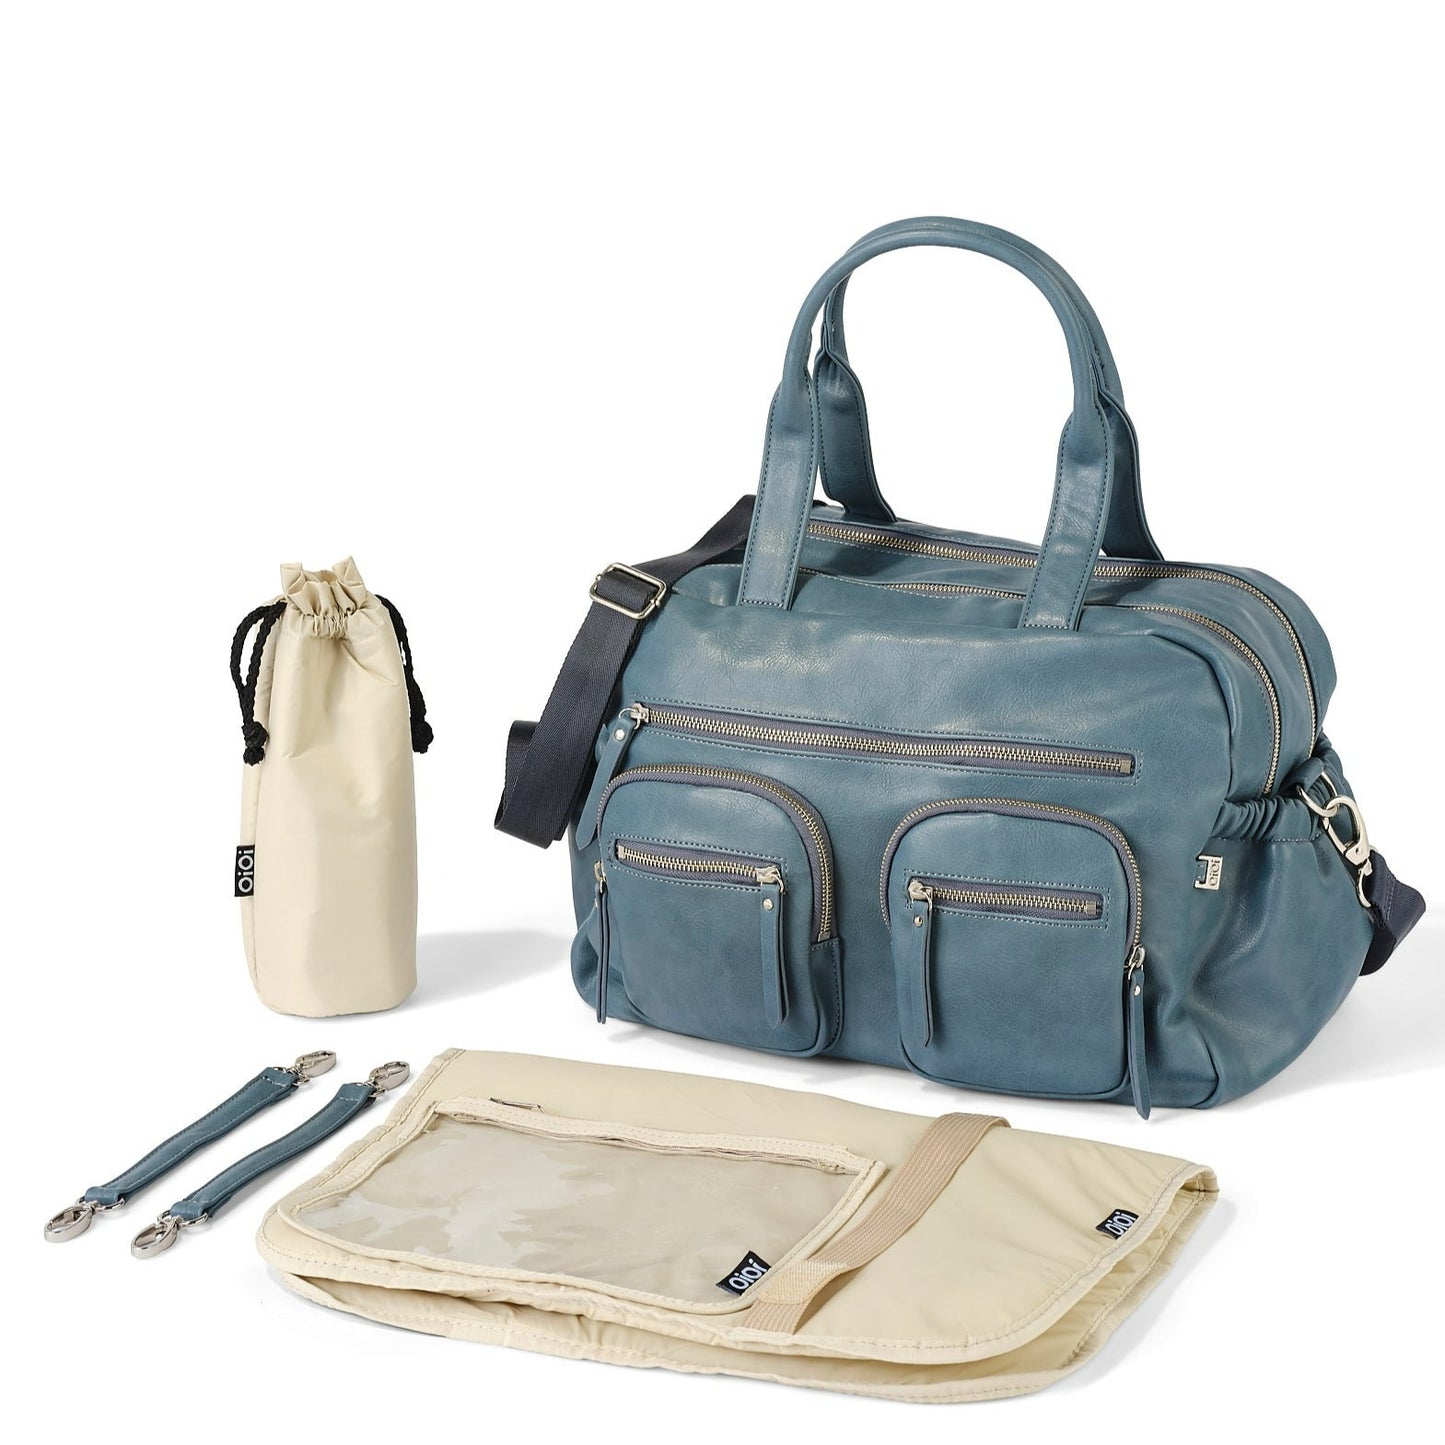 Carry All Diaper Bag - Stone Blue Vegan Leather